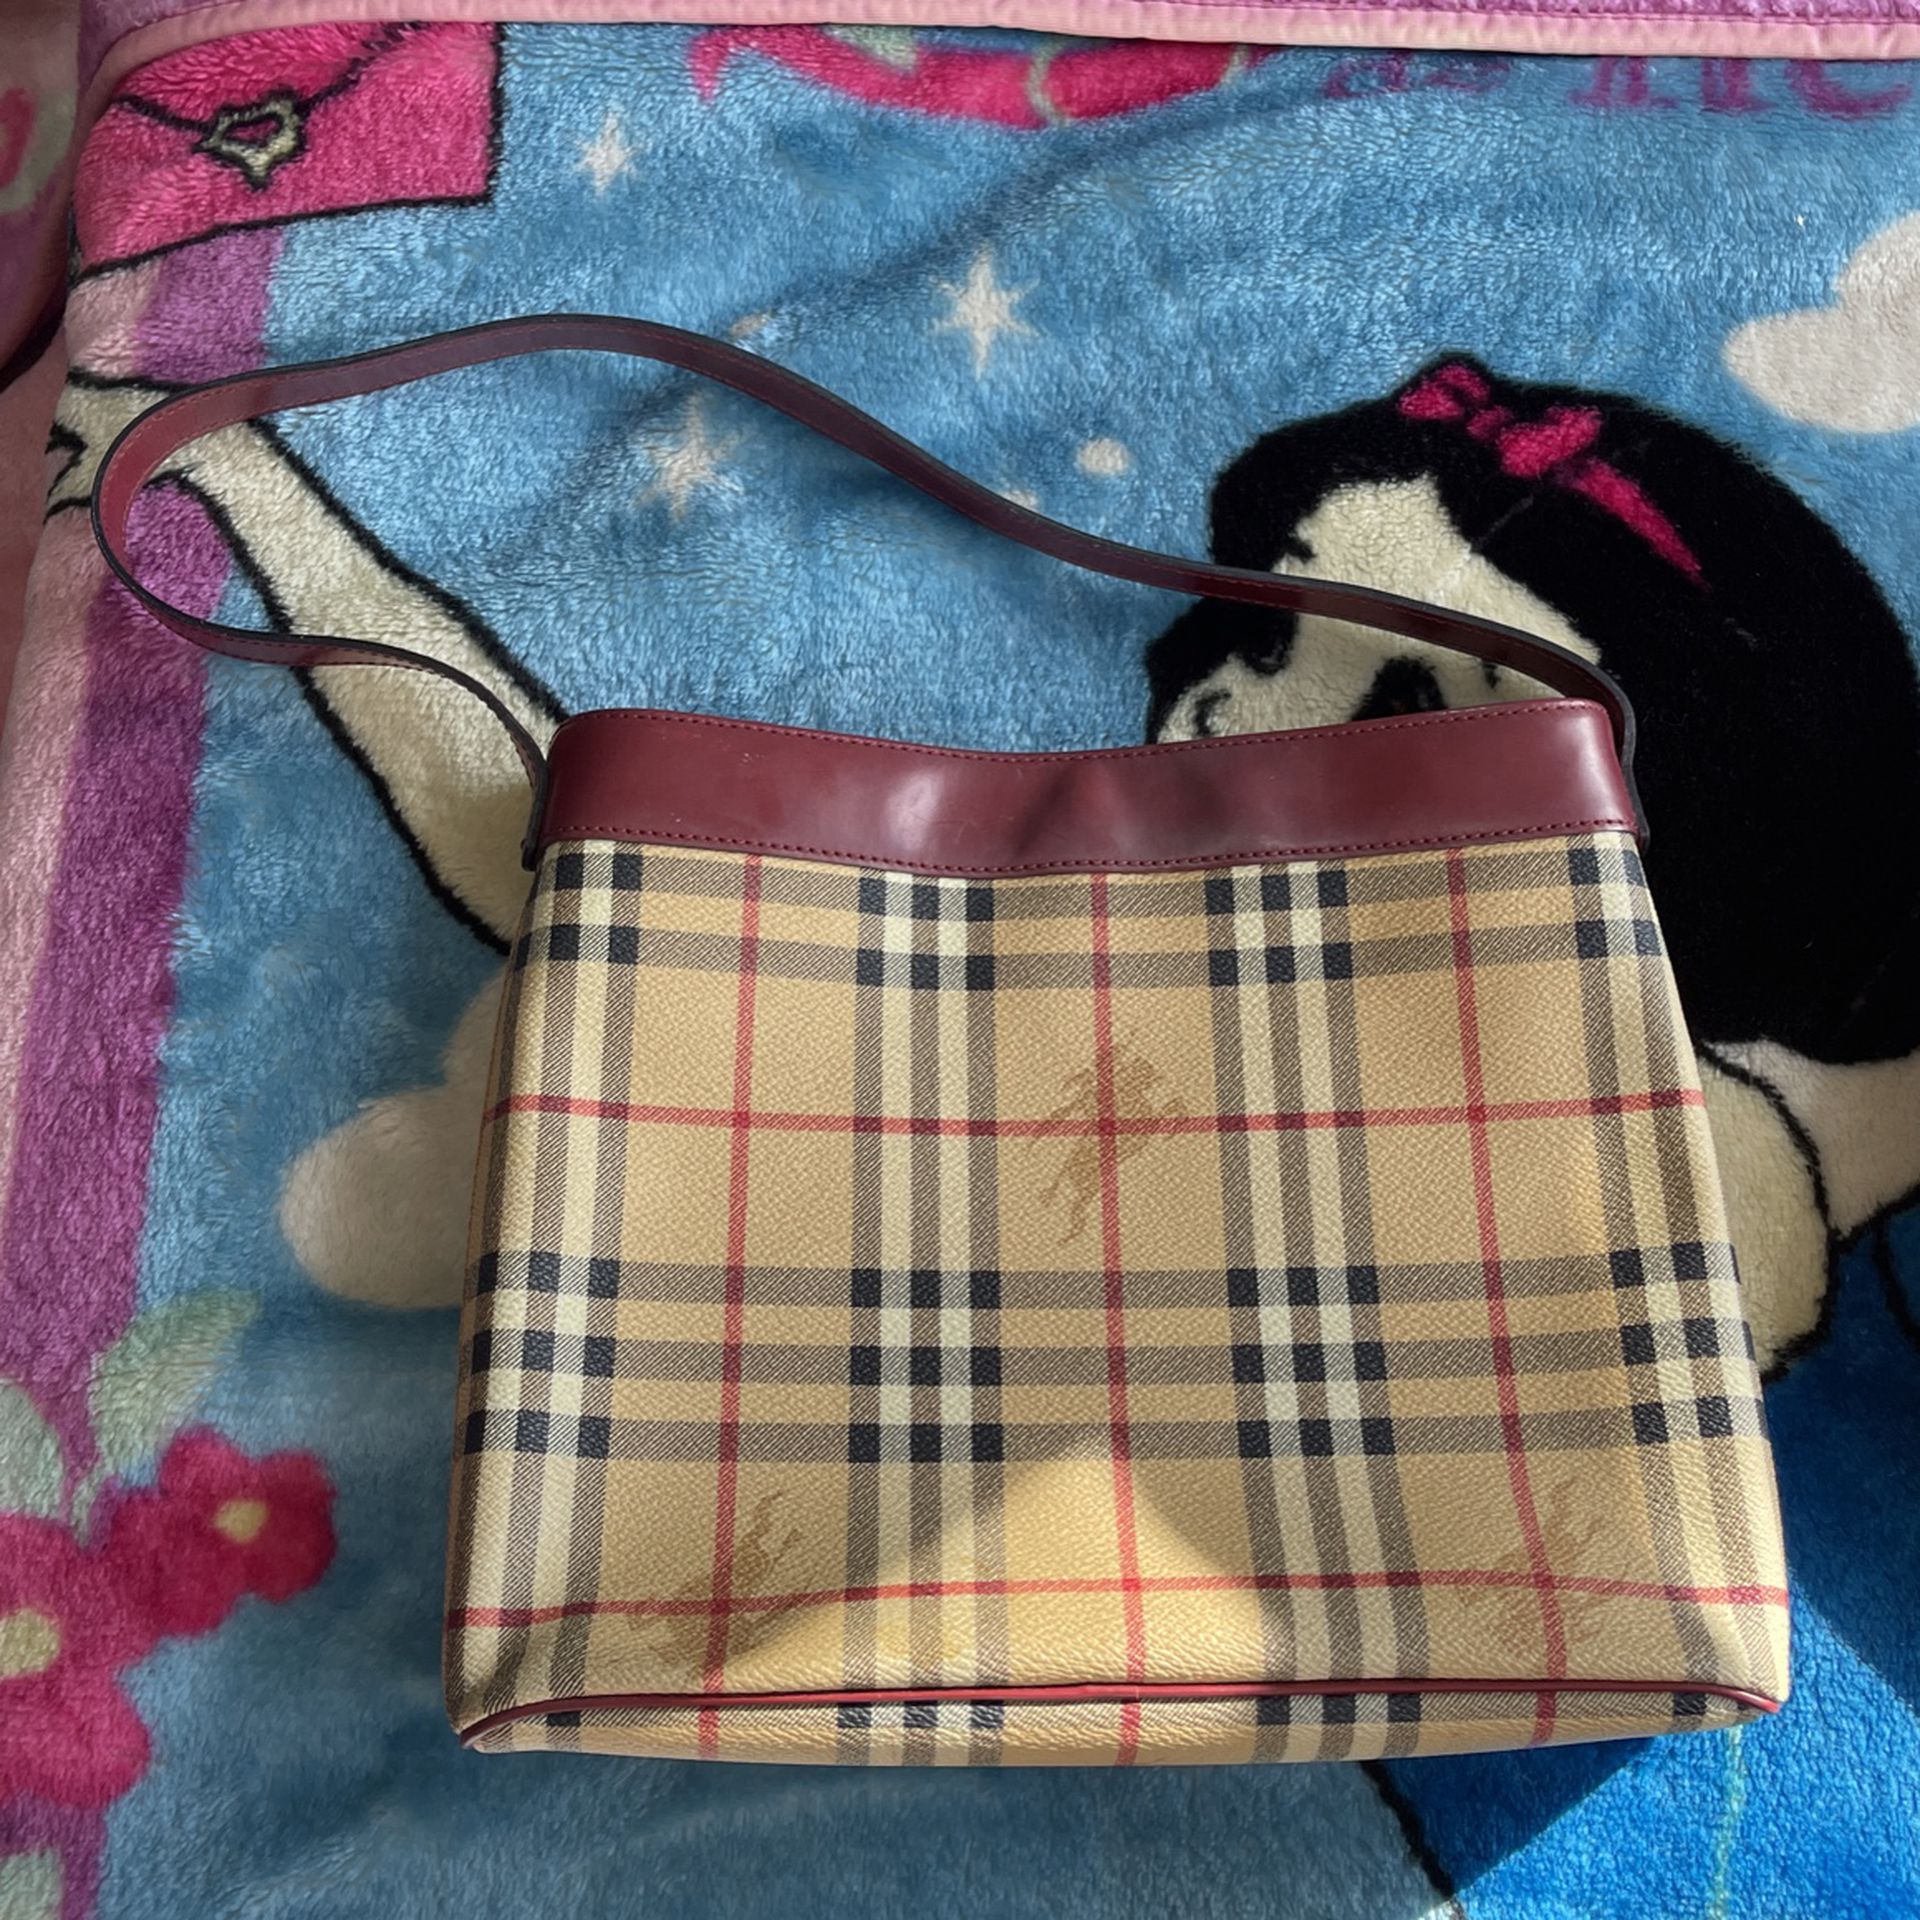 BURBERRY - Authentic Real Burberry Bag Purse 